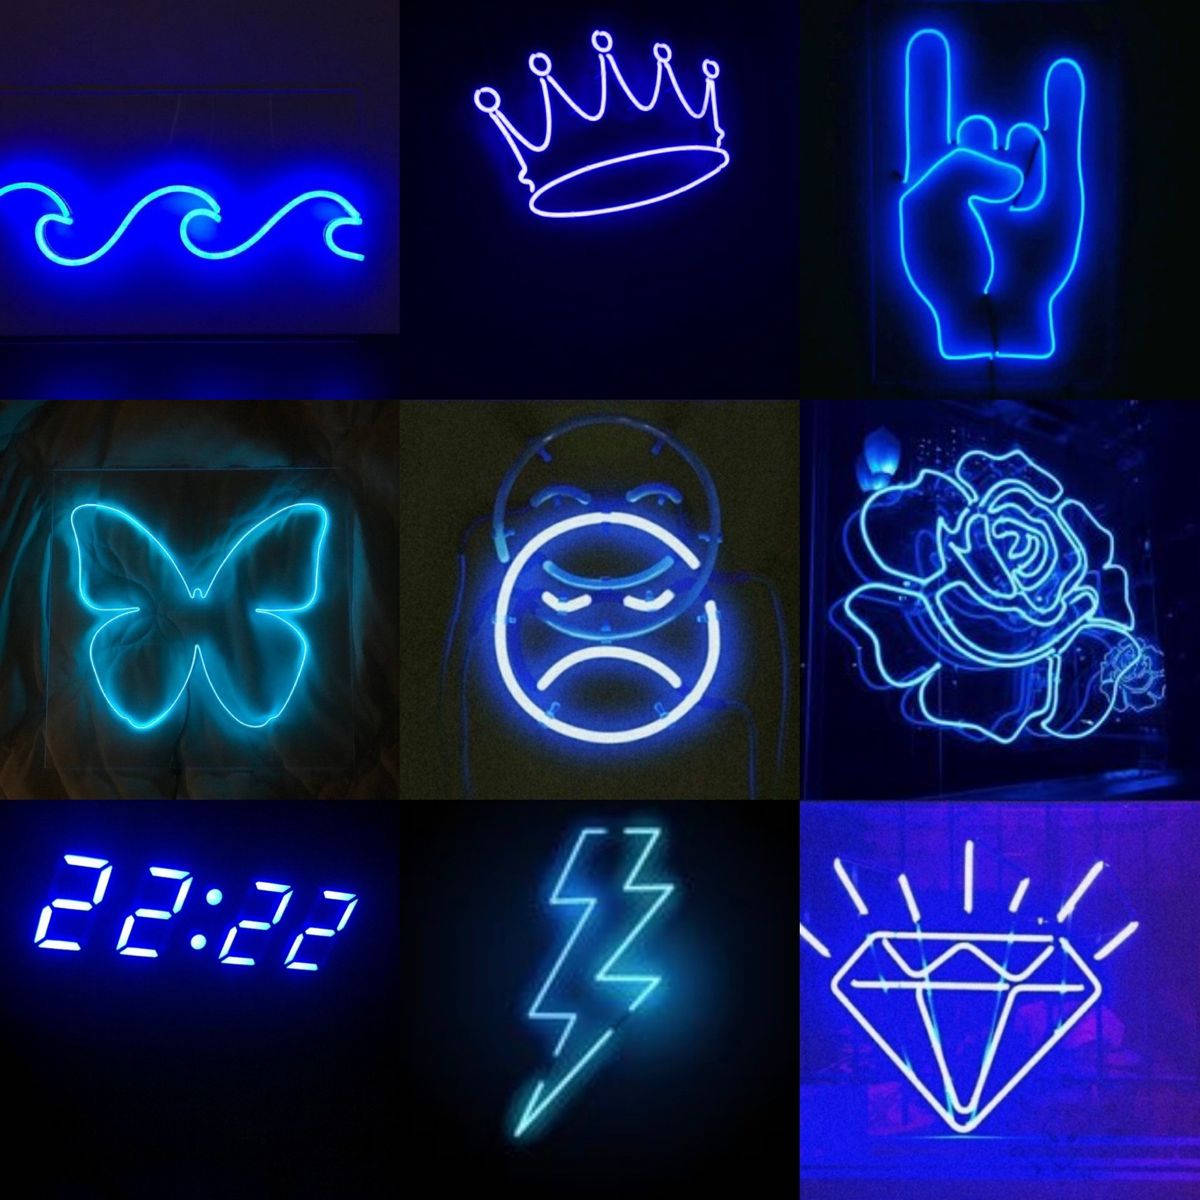 Cool Neon Blue Shapes And Designs Wallpaper